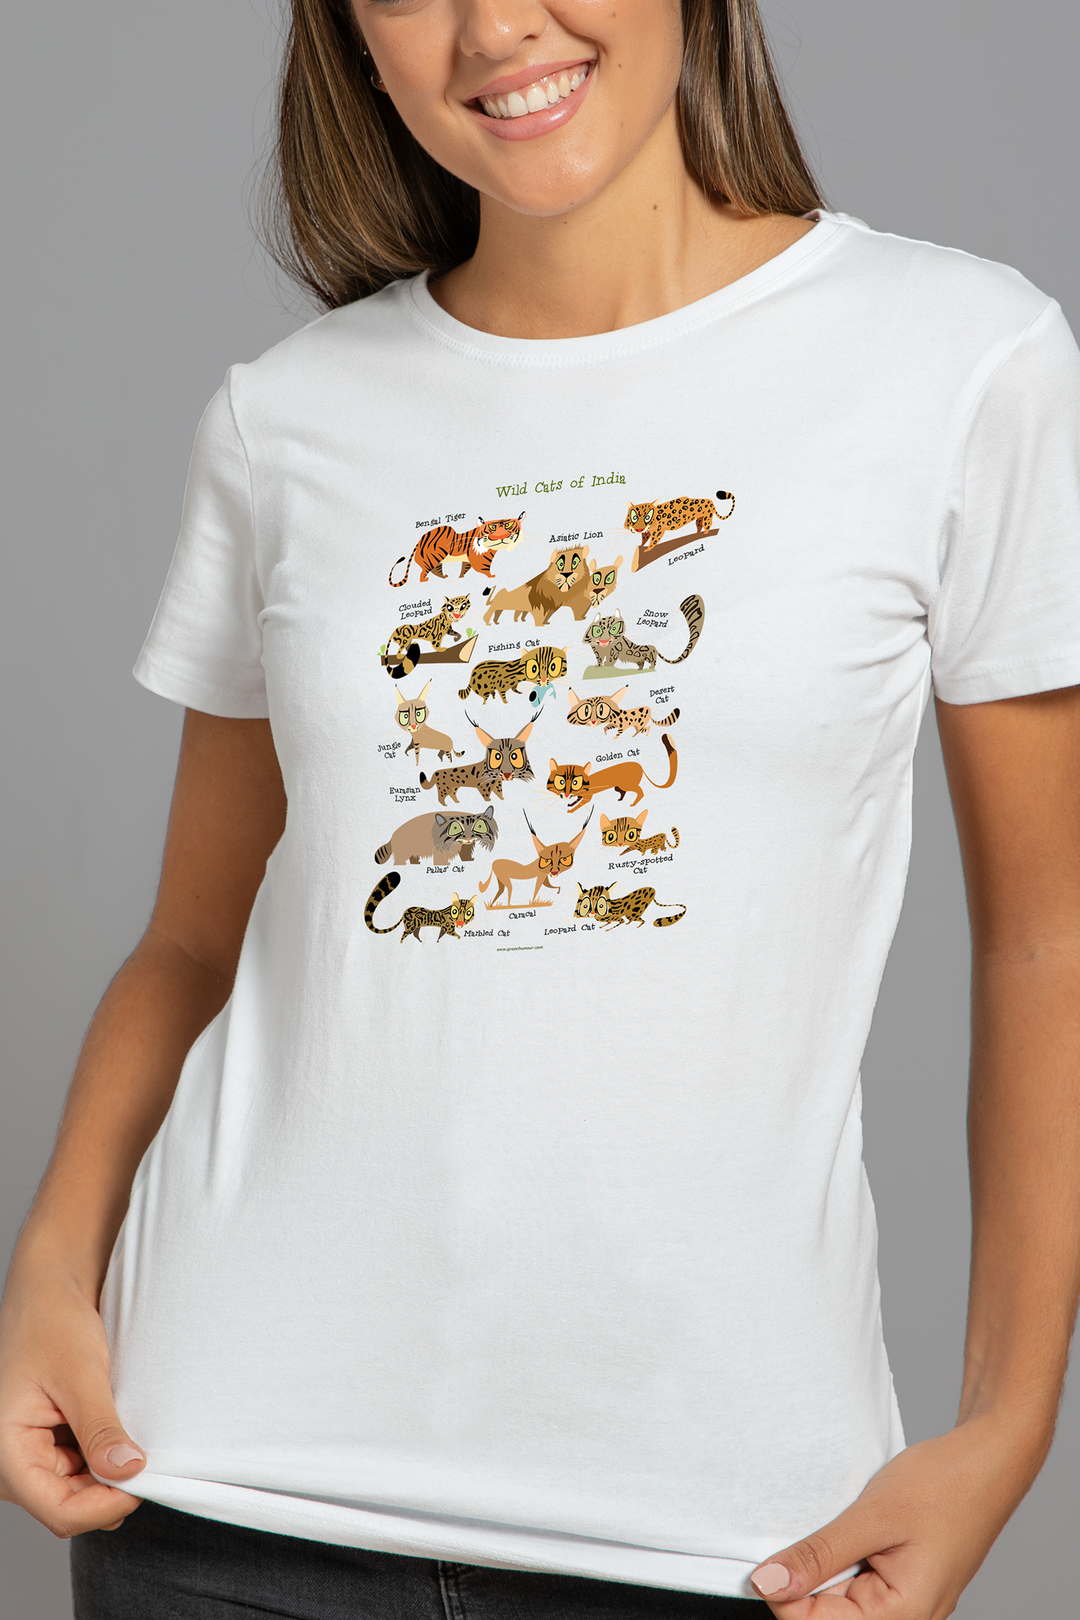 Wild Cats of India T-shirt